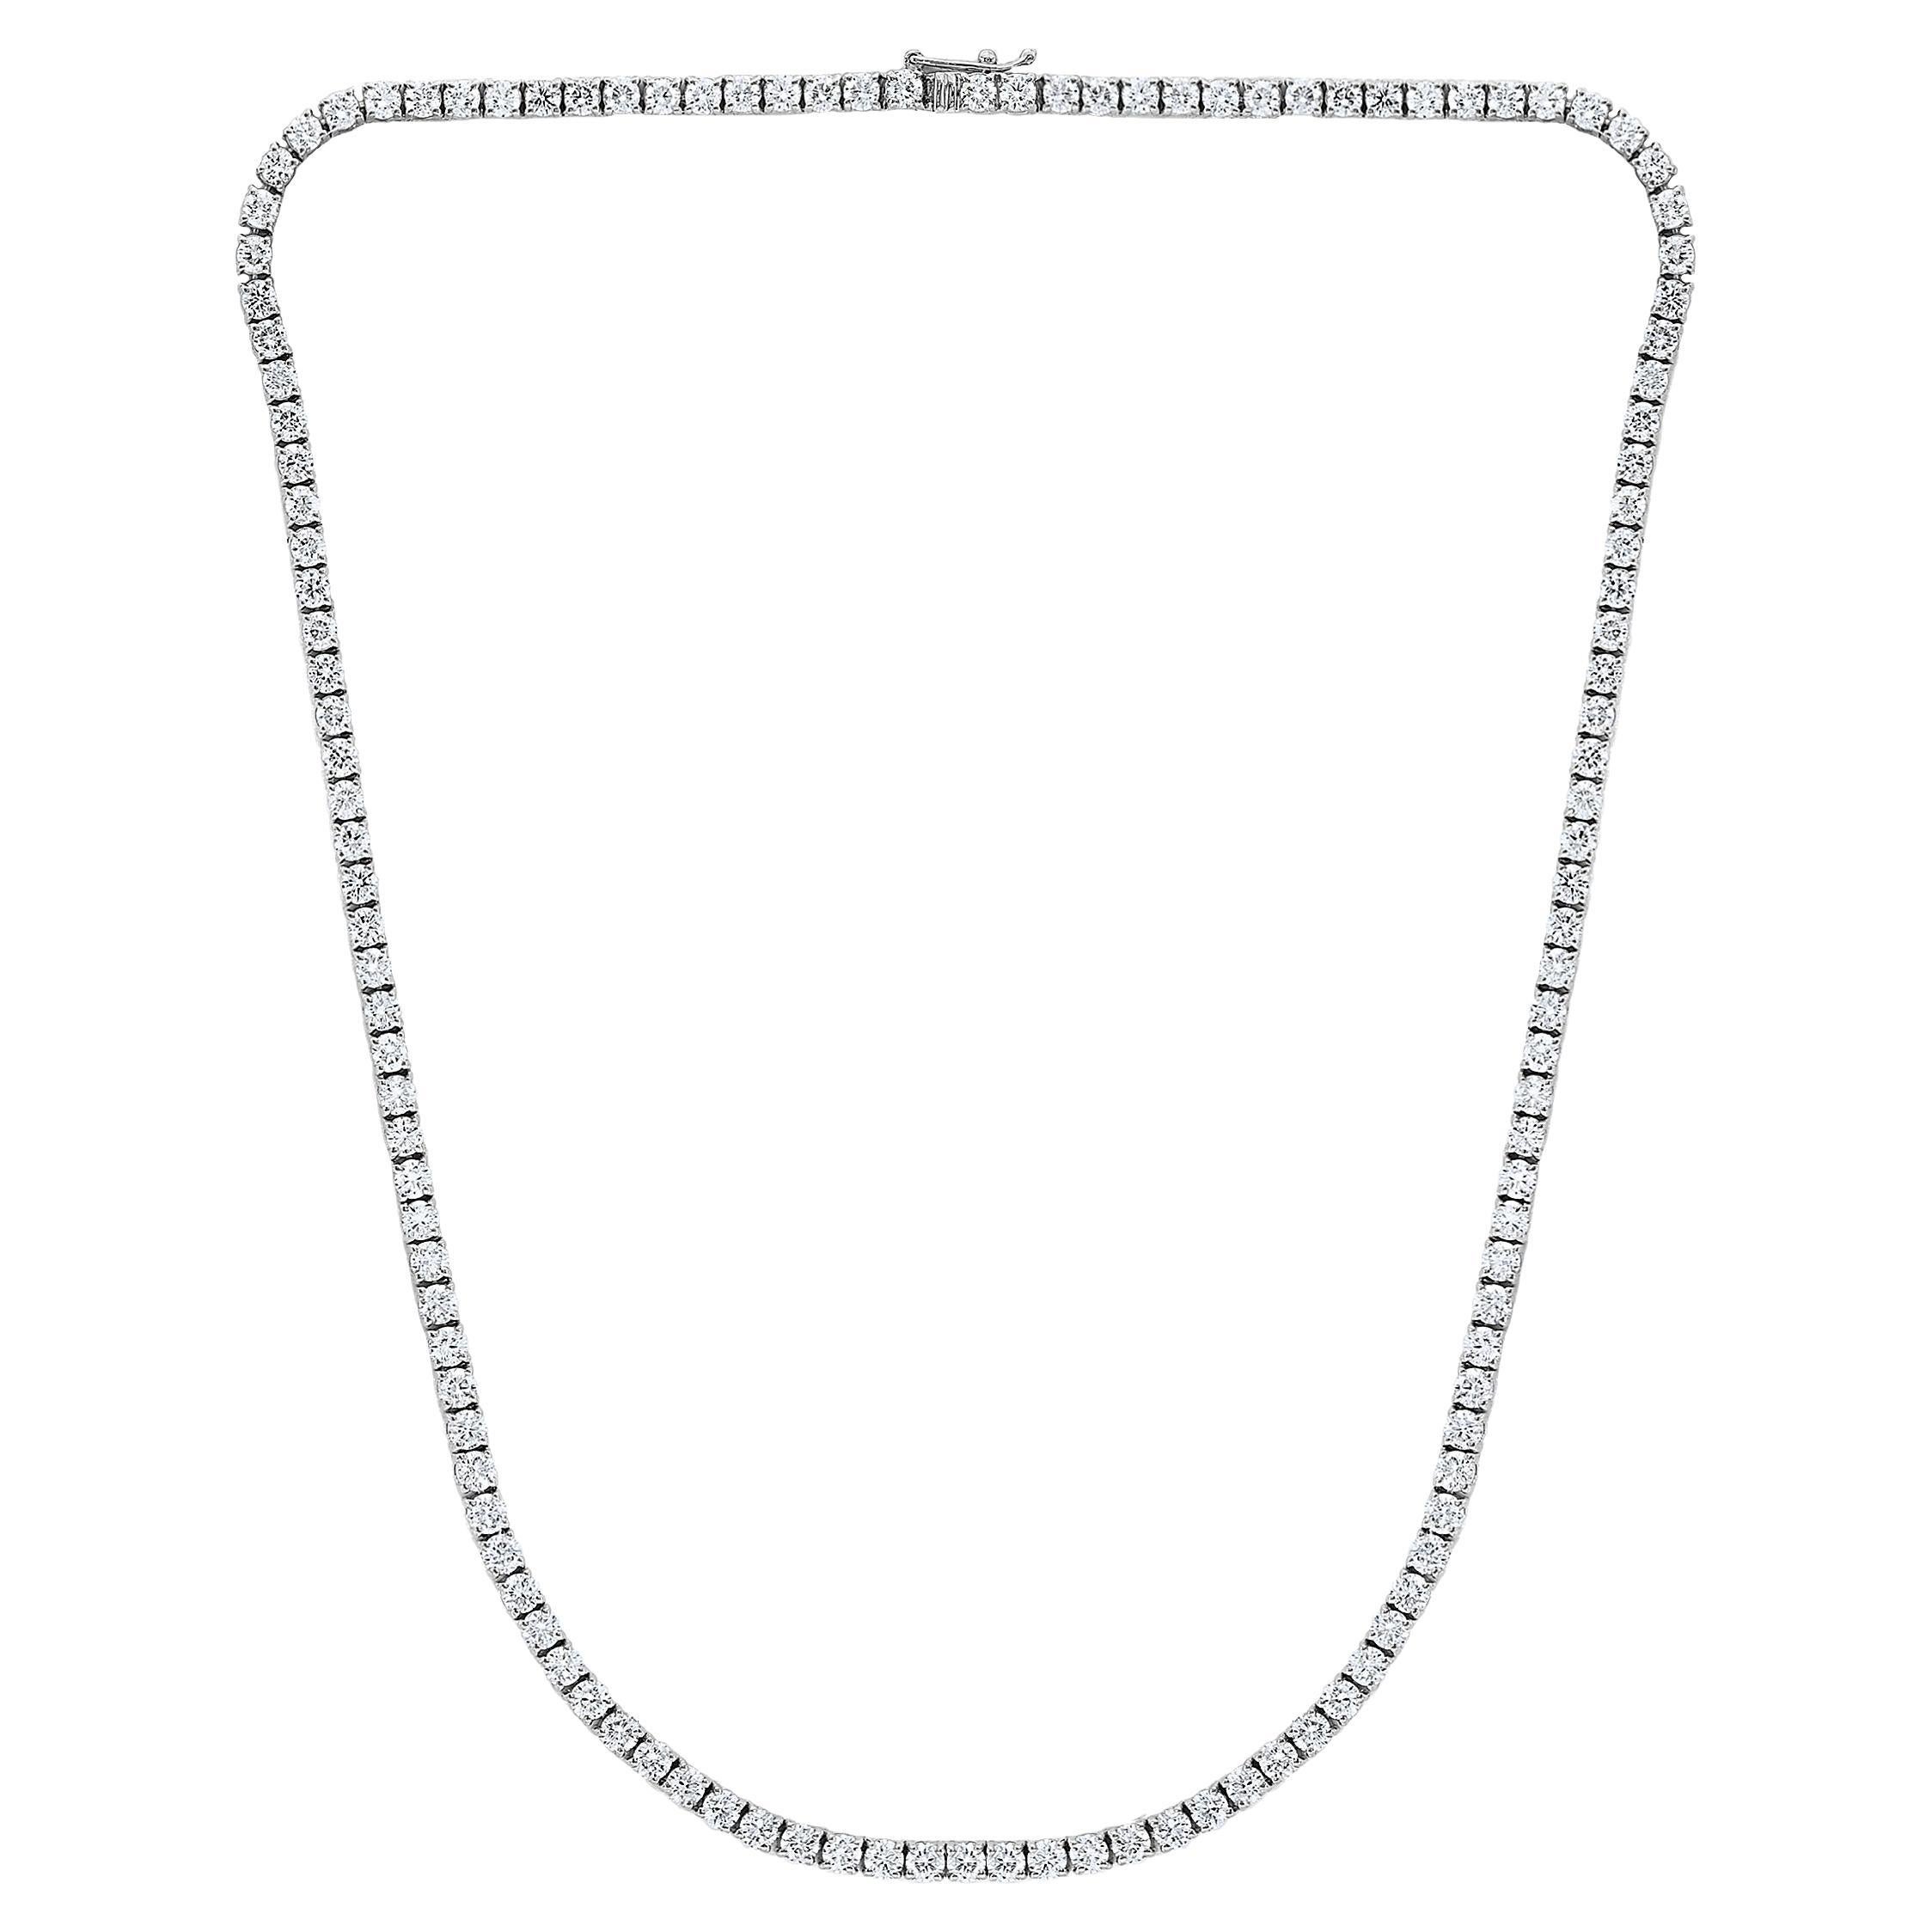 13.01 Carat Diamond Tennis Necklace in 14K White Gold For Sale